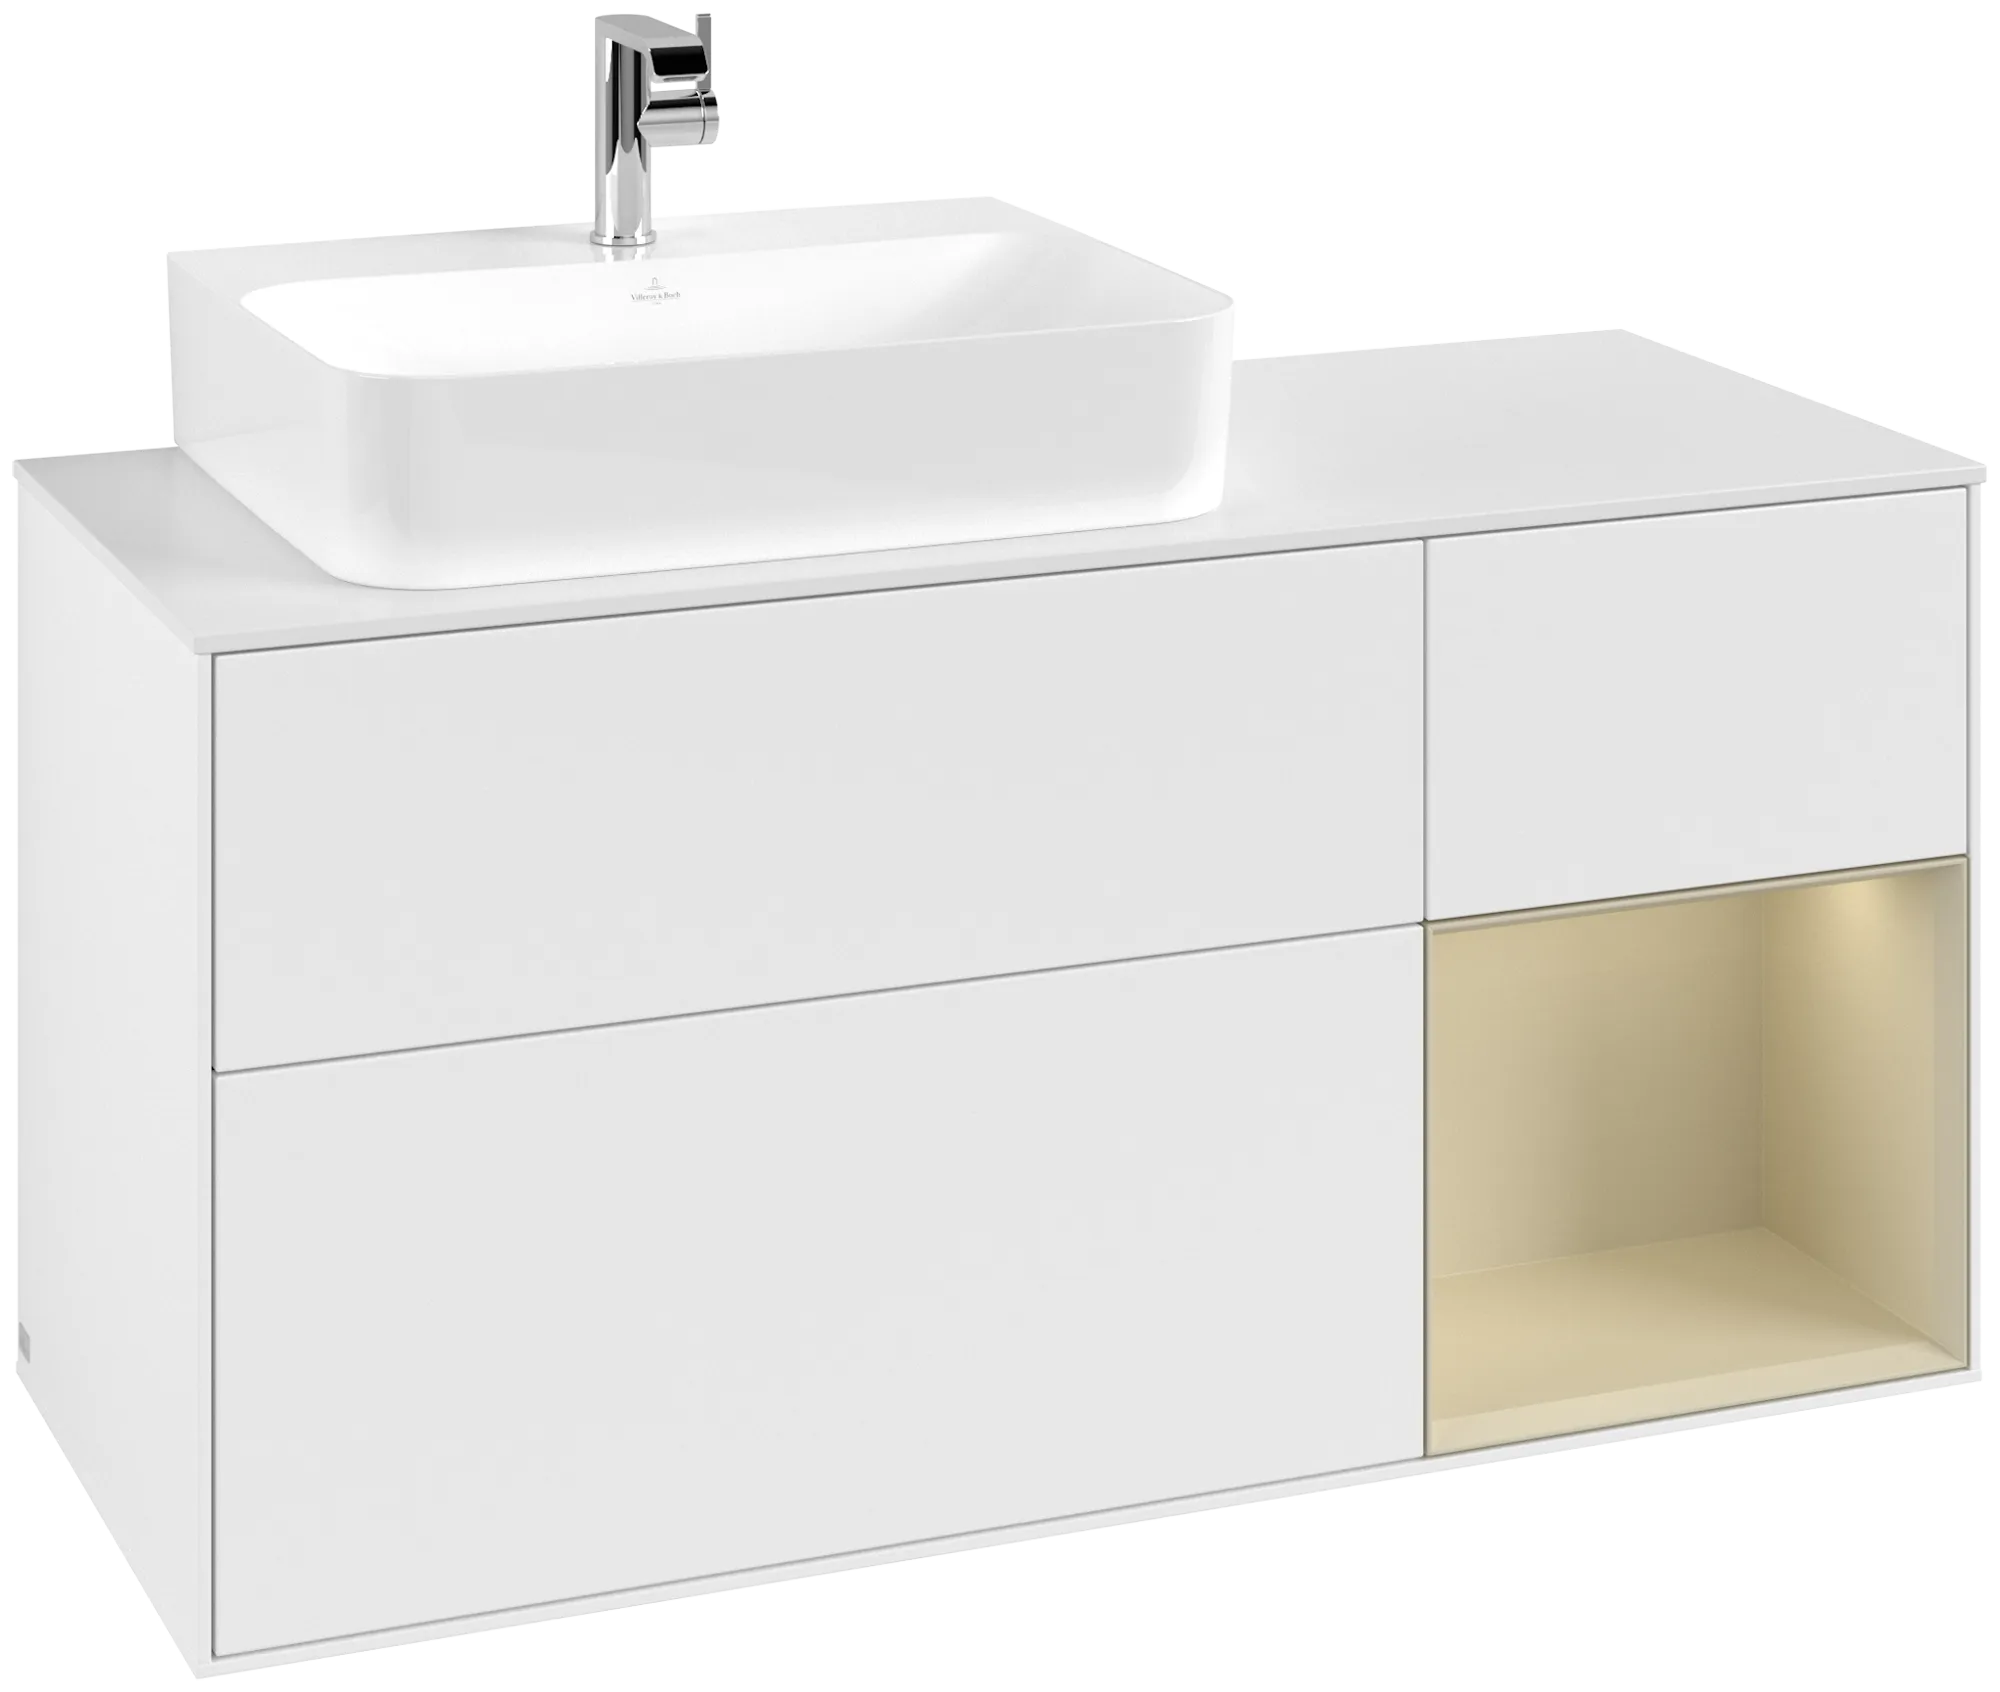 Picture of VILLEROY BOCH Finion Vanity unit, with lighting, 3 pull-out compartments, 1200 x 603 x 501 mm, White Matt Lacquer / Silk Grey Matt Lacquer / Glass White Matt #G151HJMT